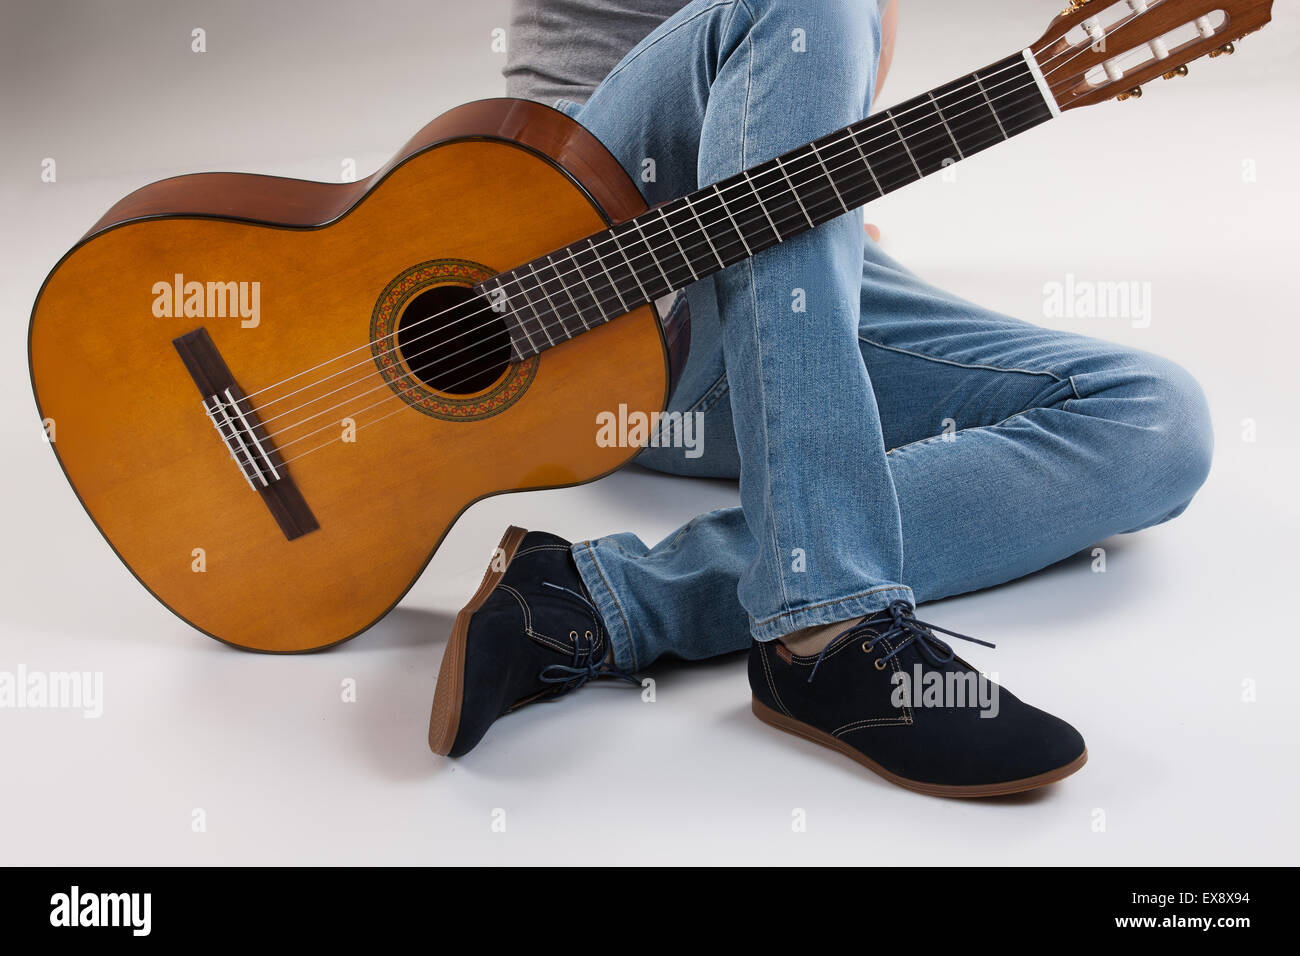 man men male studio jeans denim object background guitar play body part music instrument isolated group string art shoes neck Stock Photo